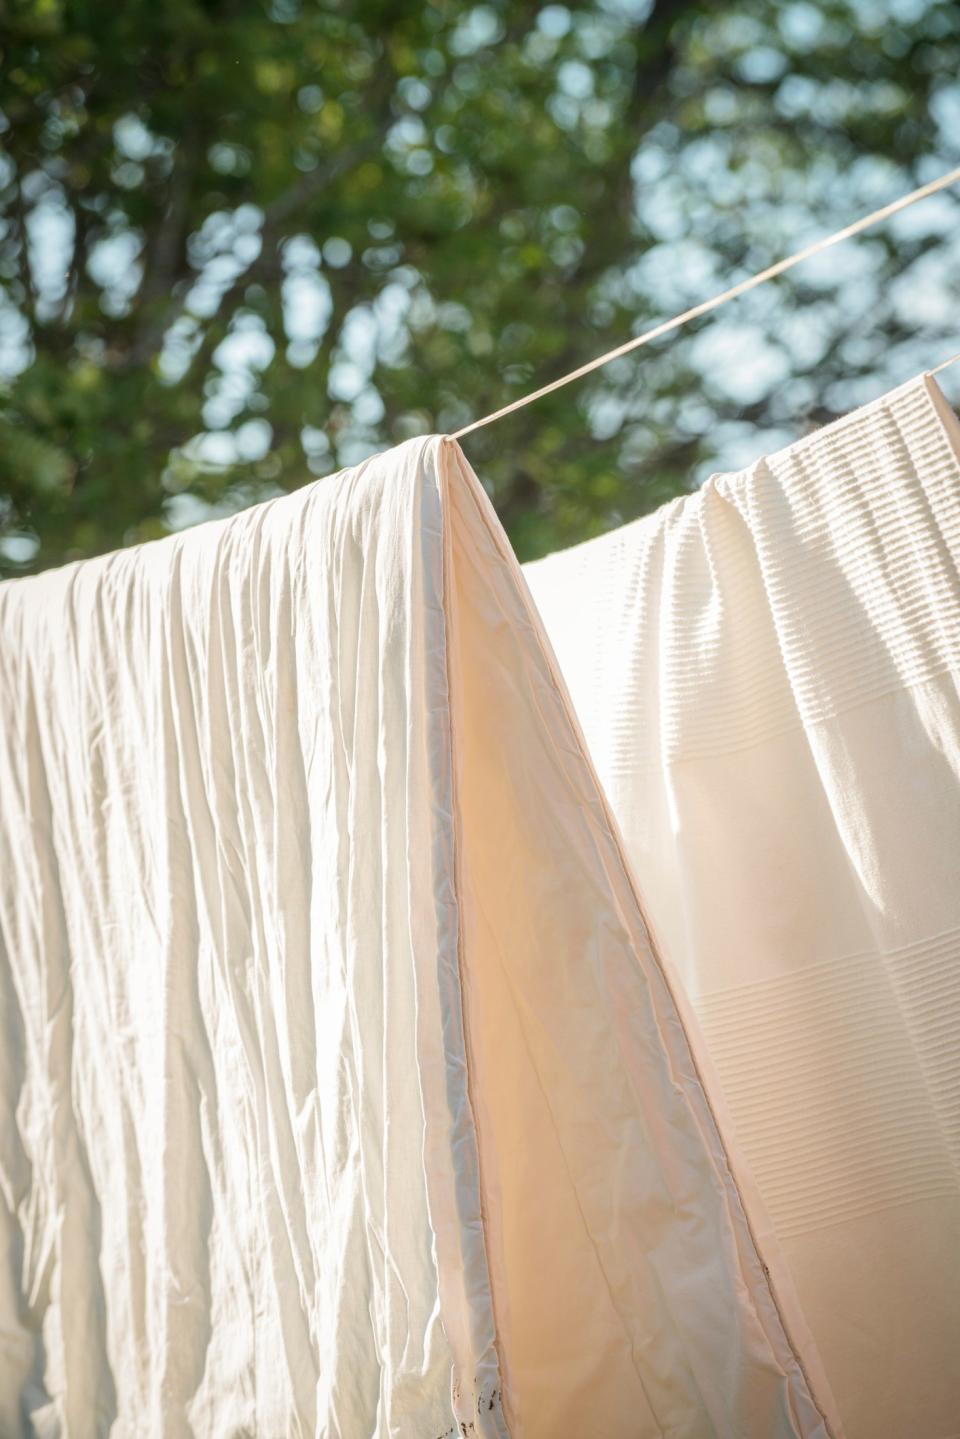 To keep your colored sheets from fading, choose a lower heat setting on your dryer or consider hanging them up to dry.